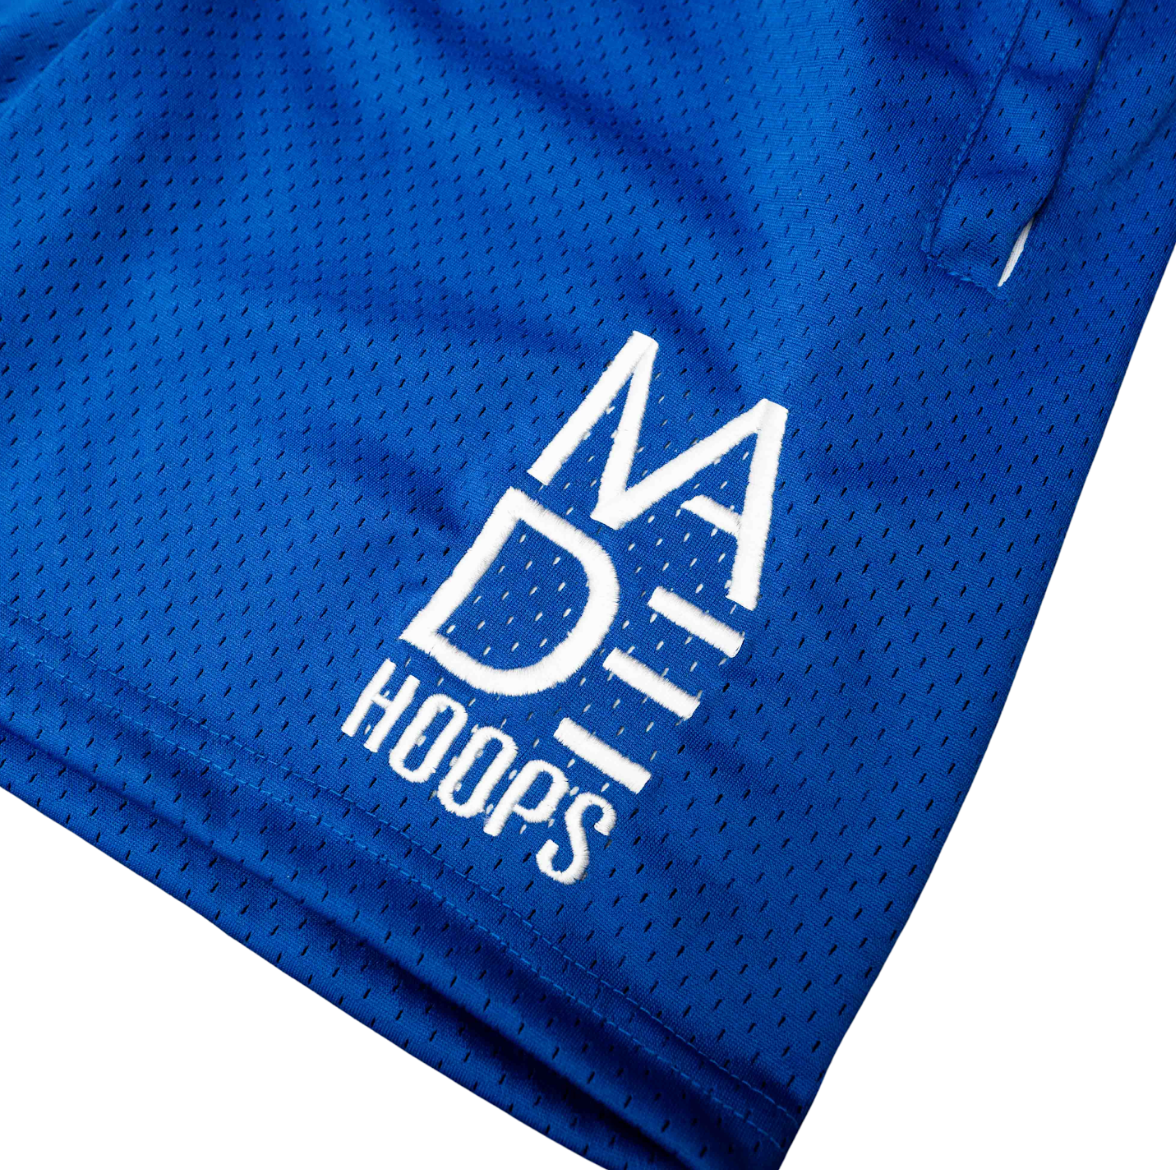 Essential Embroidered Logo Shorts | Blue